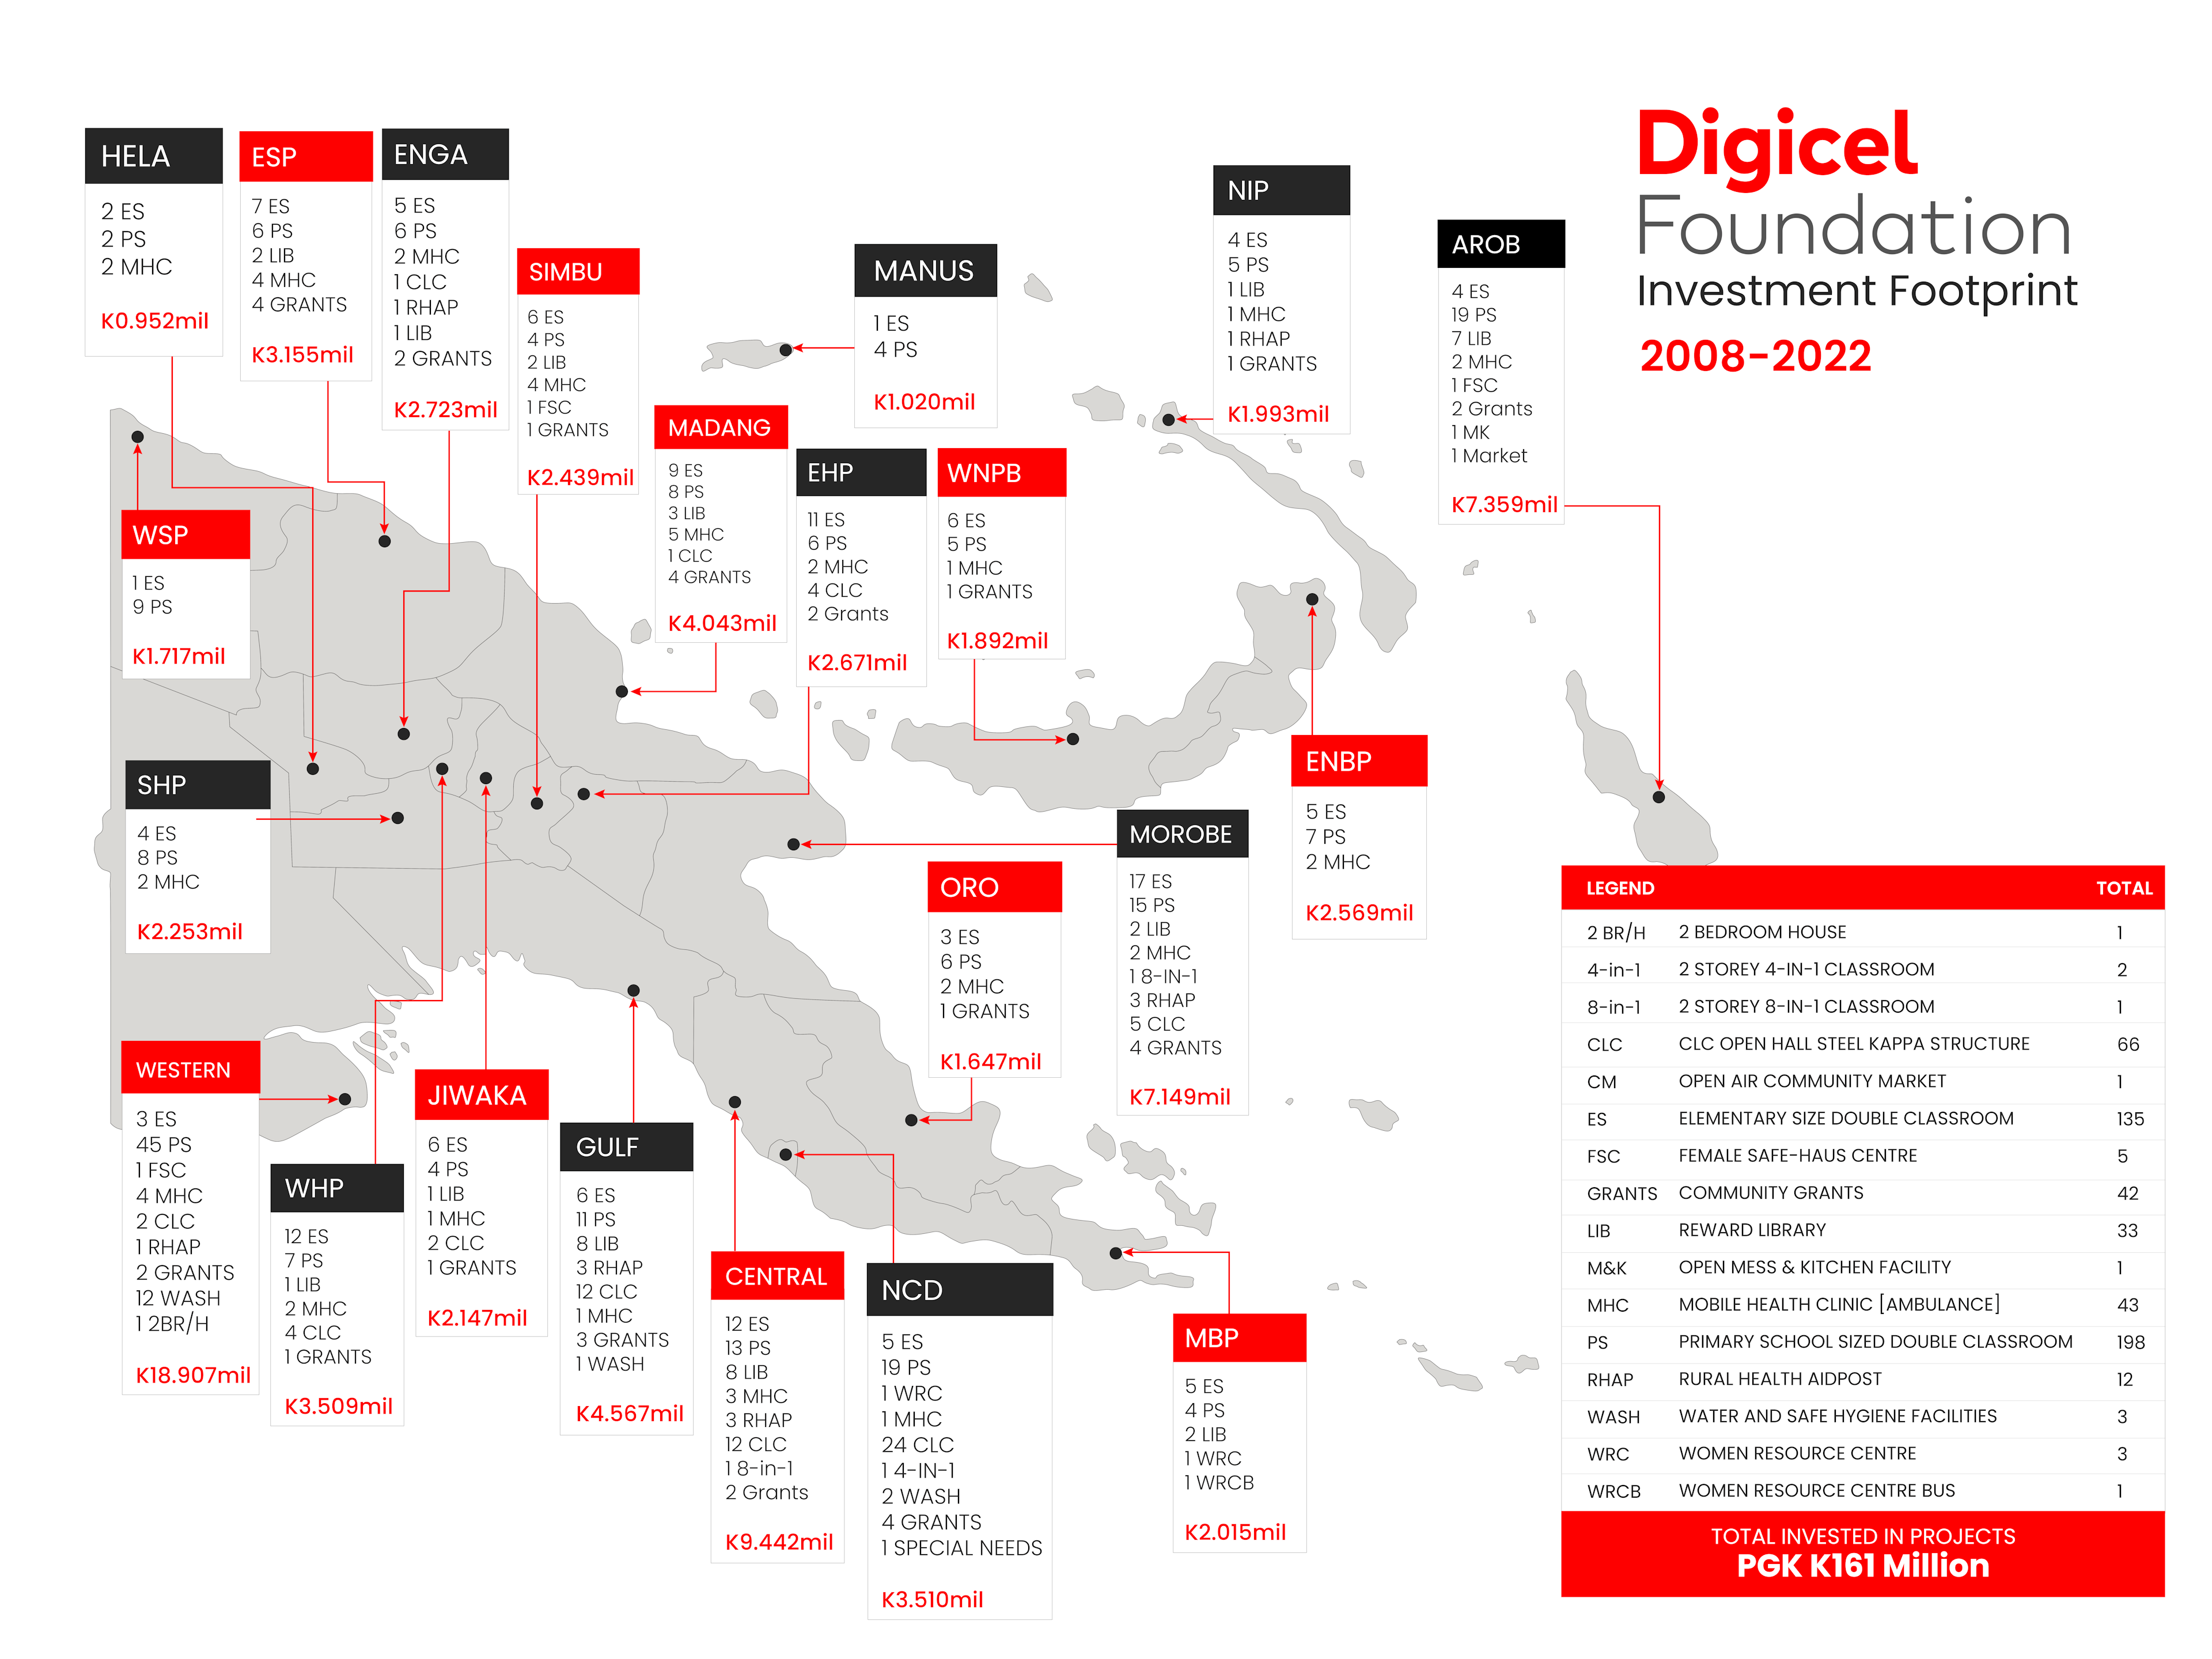 A map detailing Digicel Foundation's Investment Footprint over Papua New Guinea since 2008